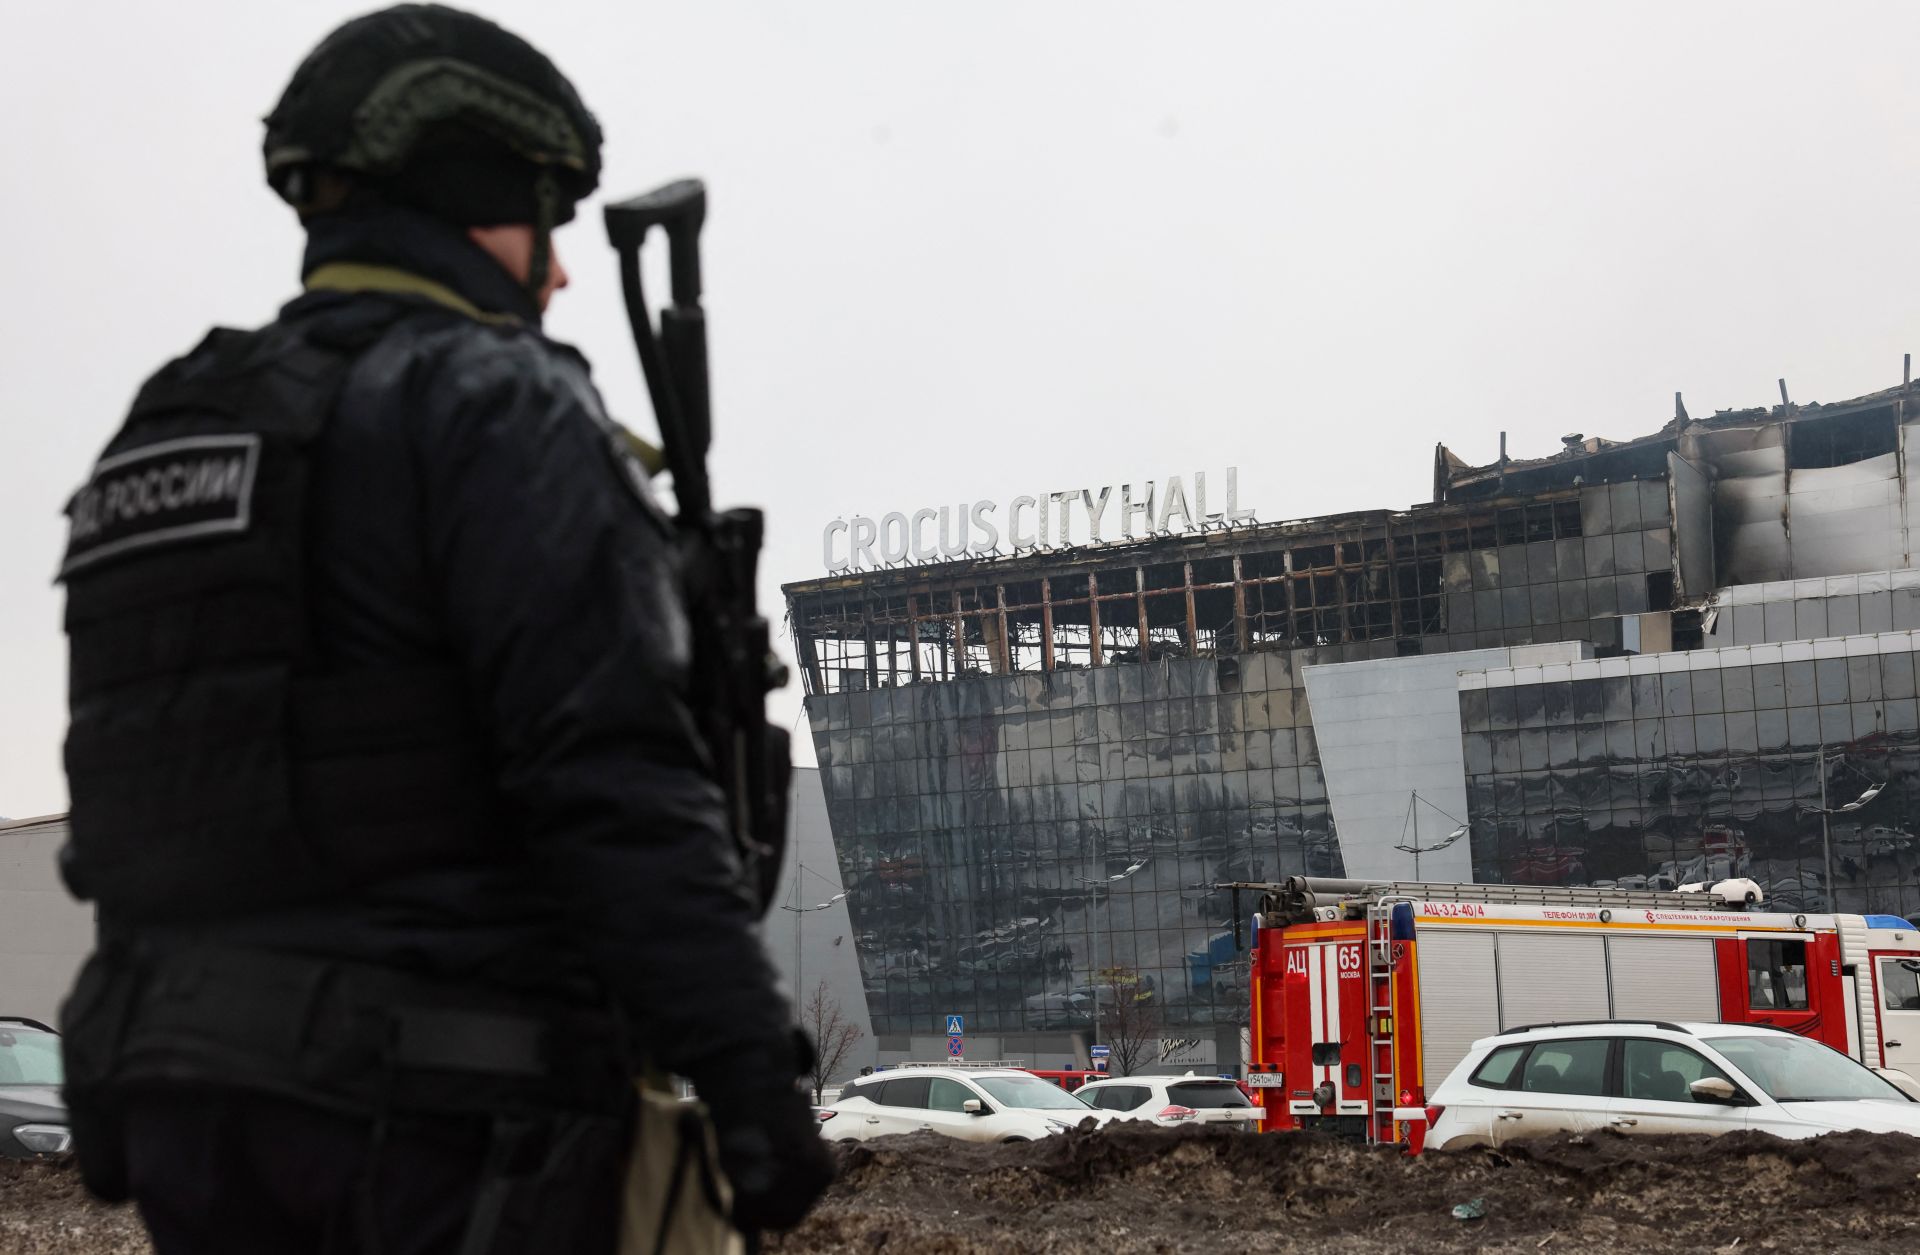 A law enforcement officer patrols the scene of the terrorist attack at the Crocus City Hall concert venue in Krasnogorsk, outside Moscow, on March 23, 2024. 